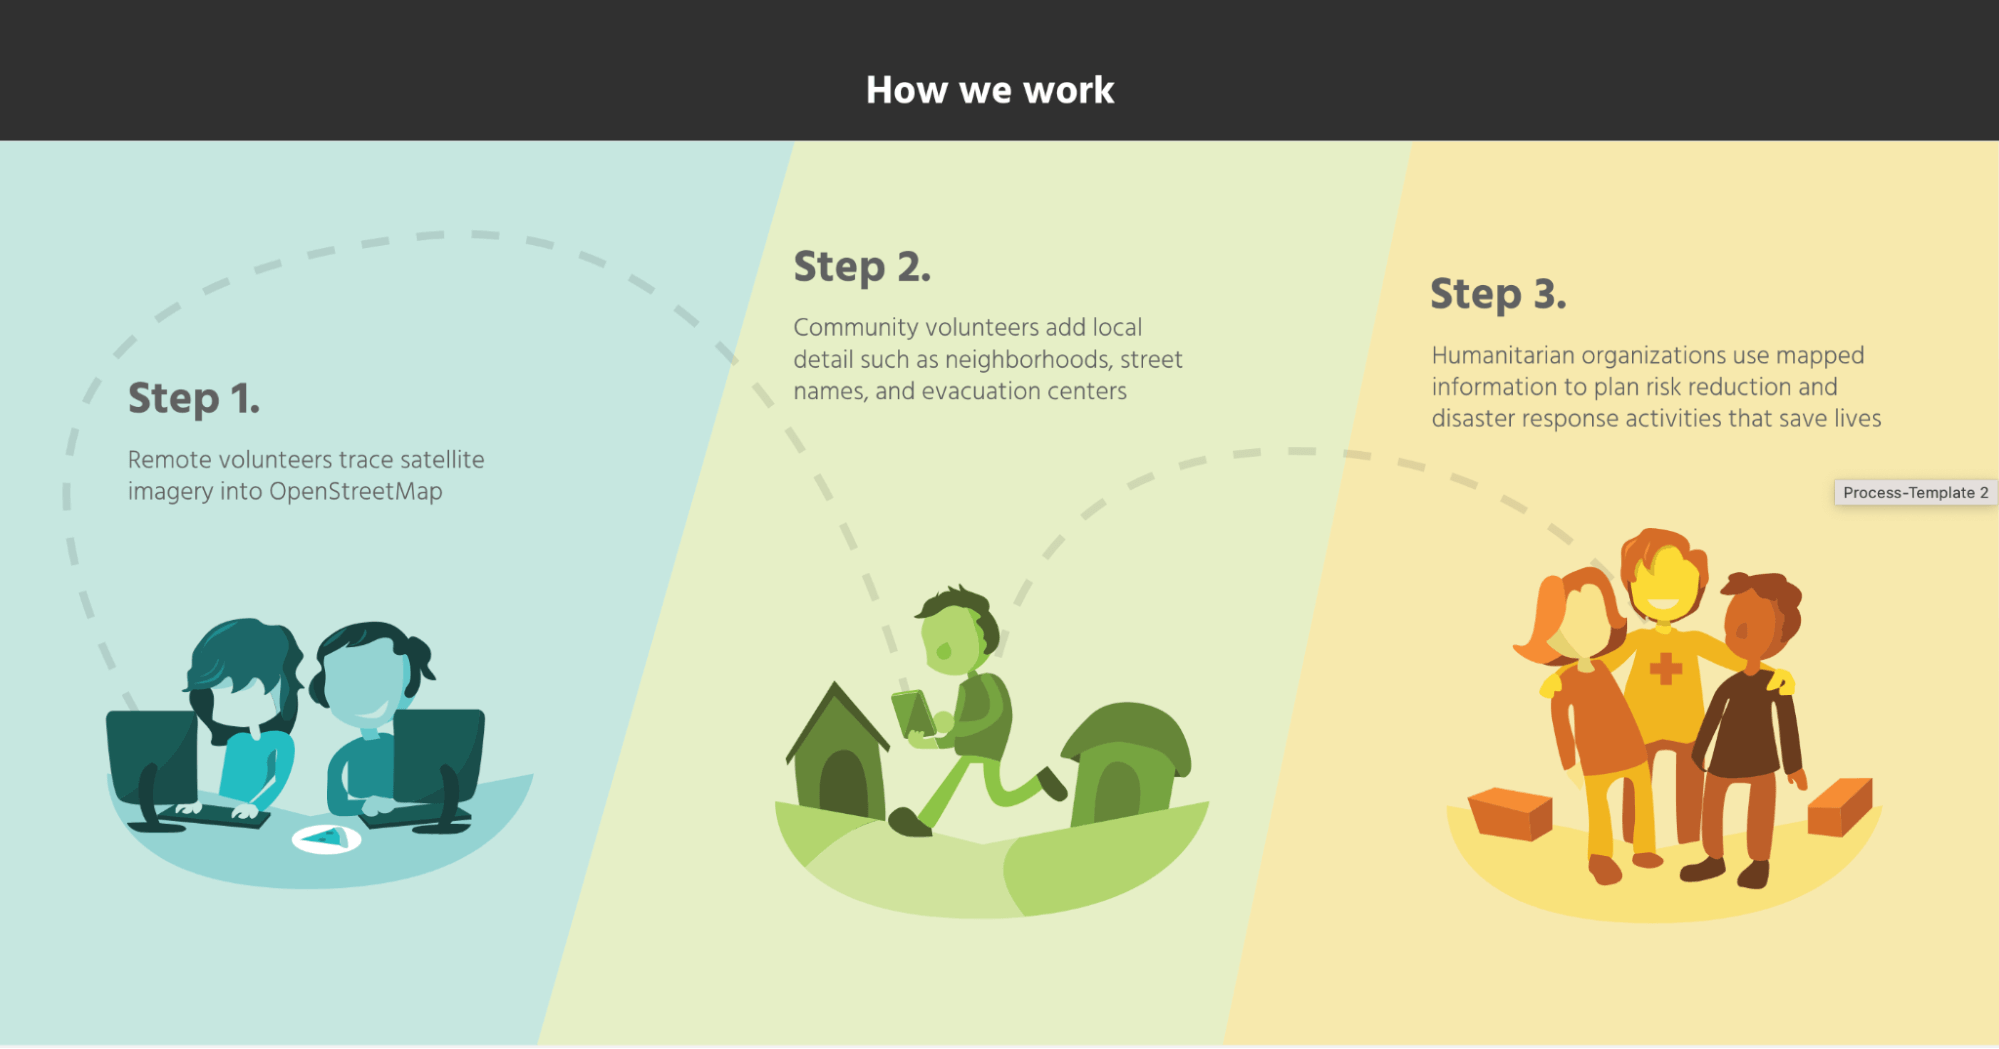 the process used in volunteering remotely for missing maps consists of three steps